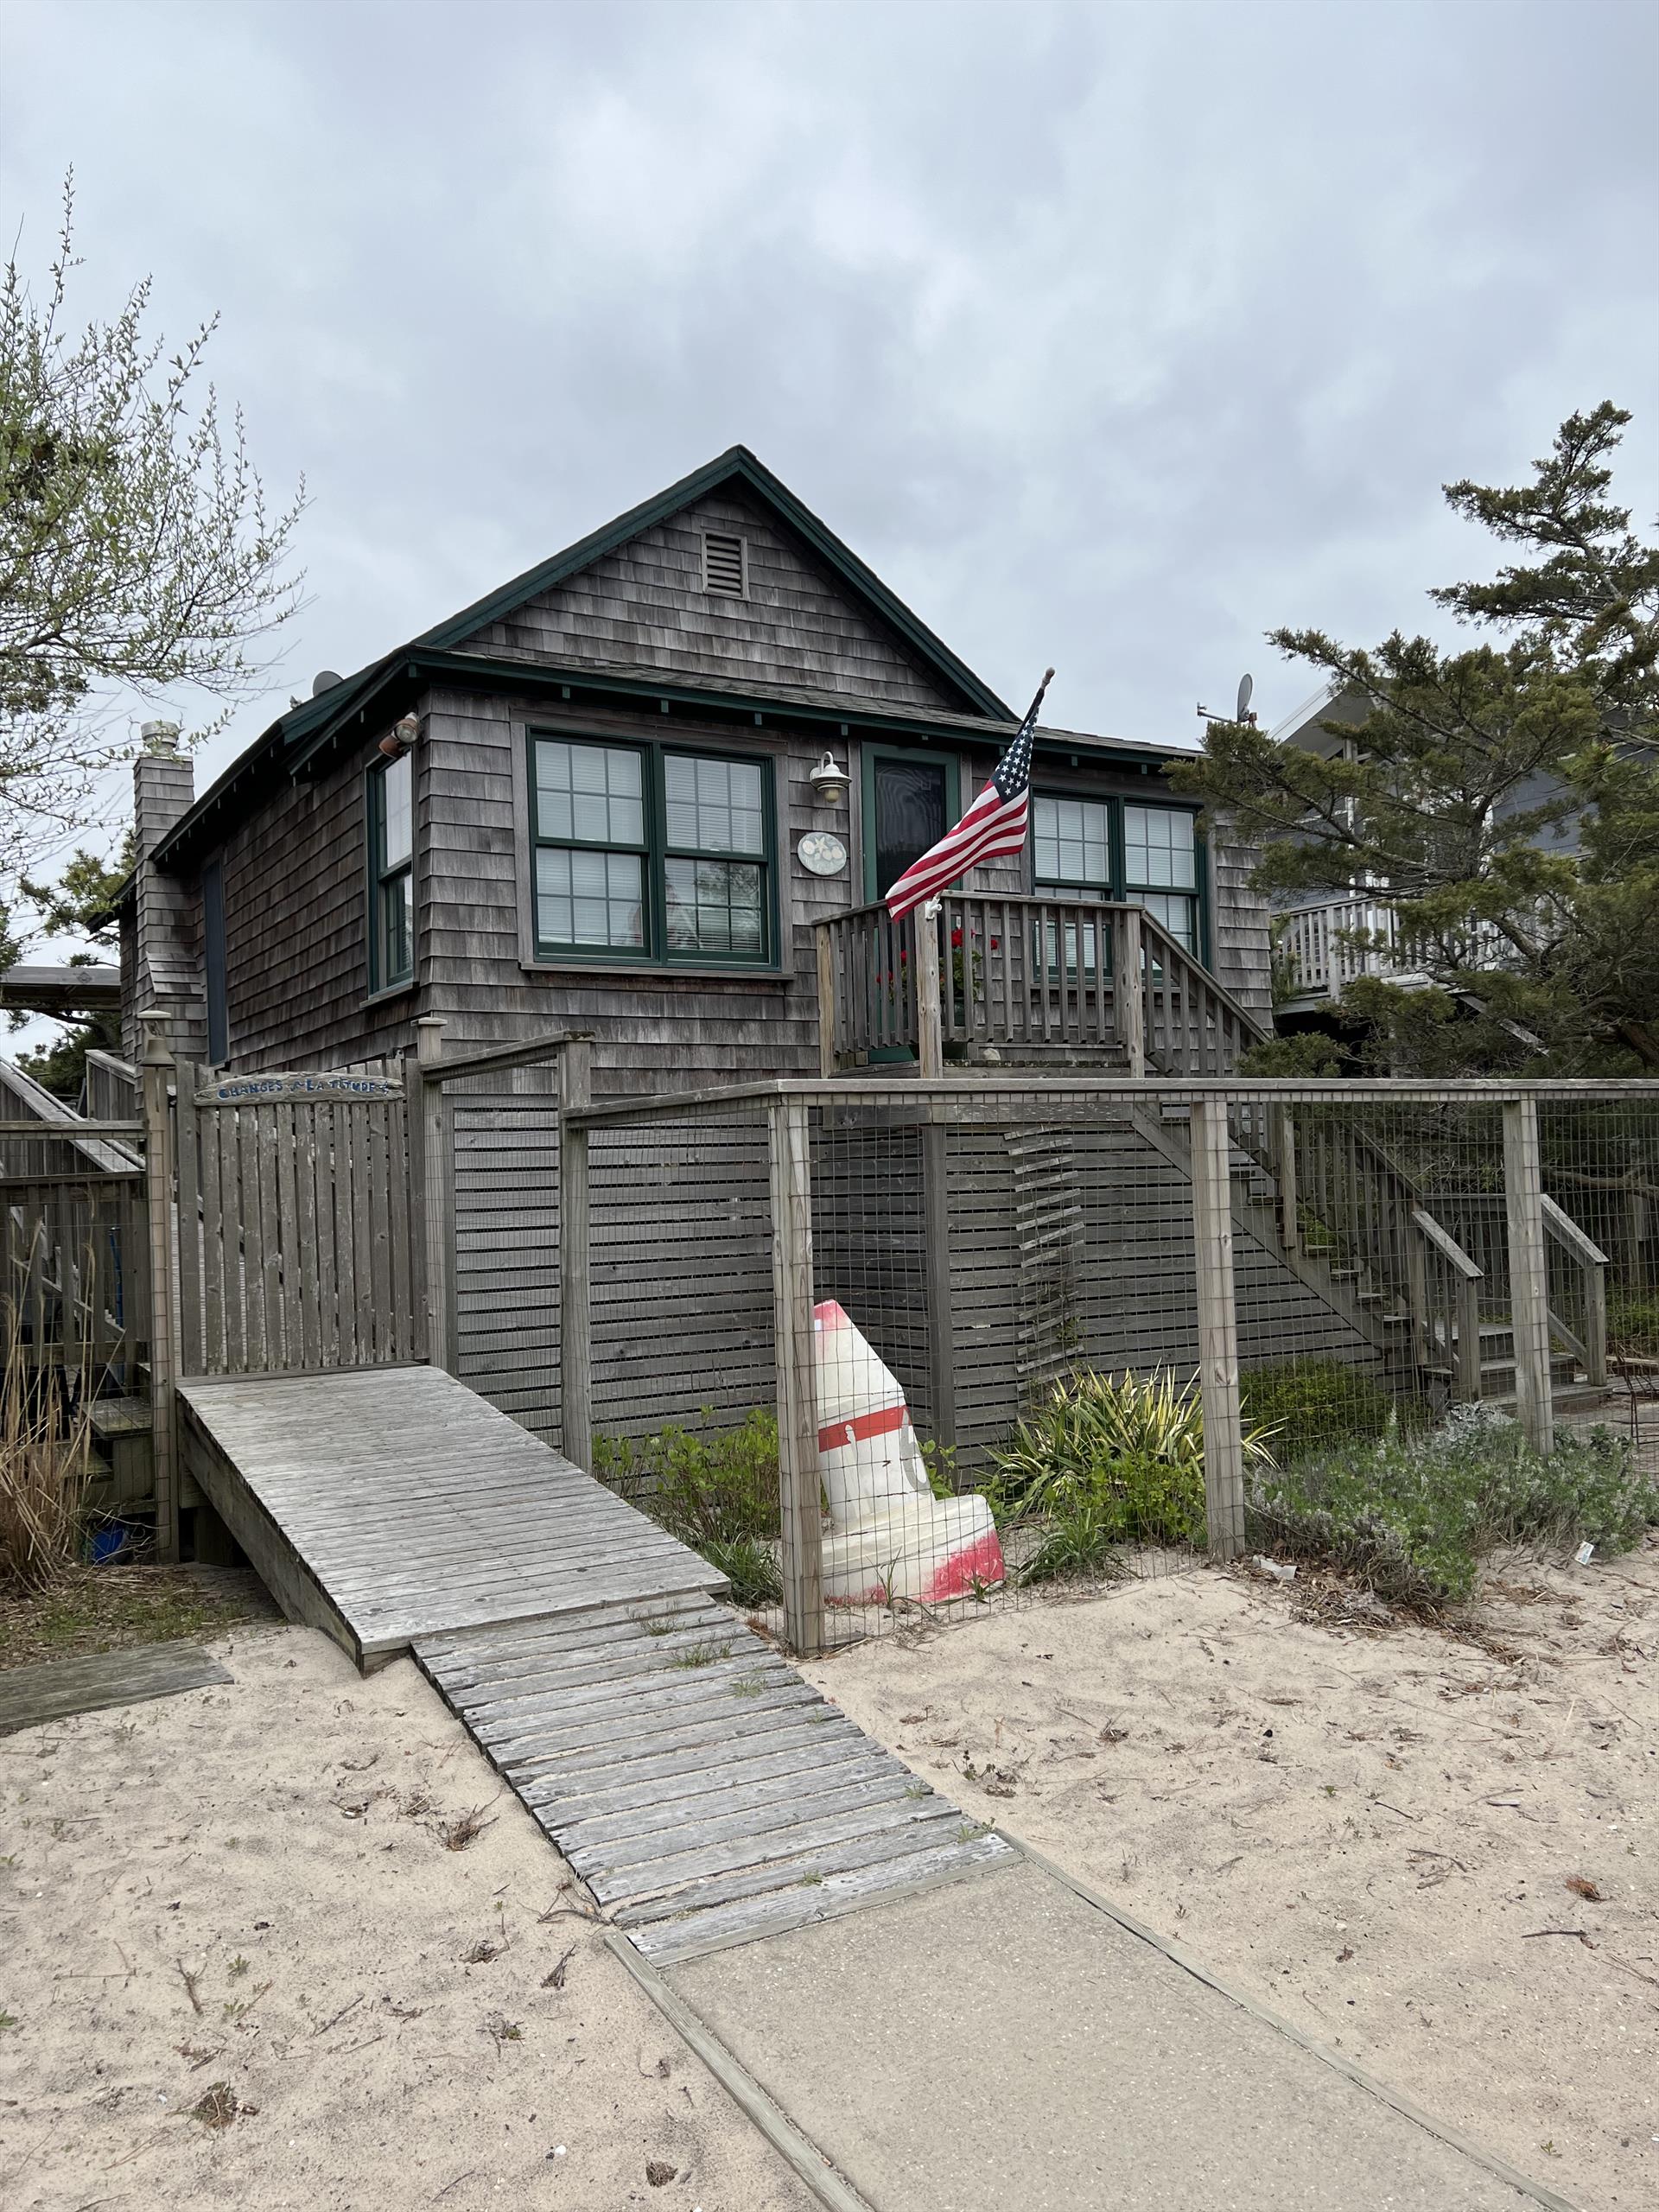 3 bedroom 2 bath home located in the heart of Ocean Bay Park. Very close to the beach, this spacious and open concept floor plan is a great place to spend your Fire Island vacation.  <br>
<br>
